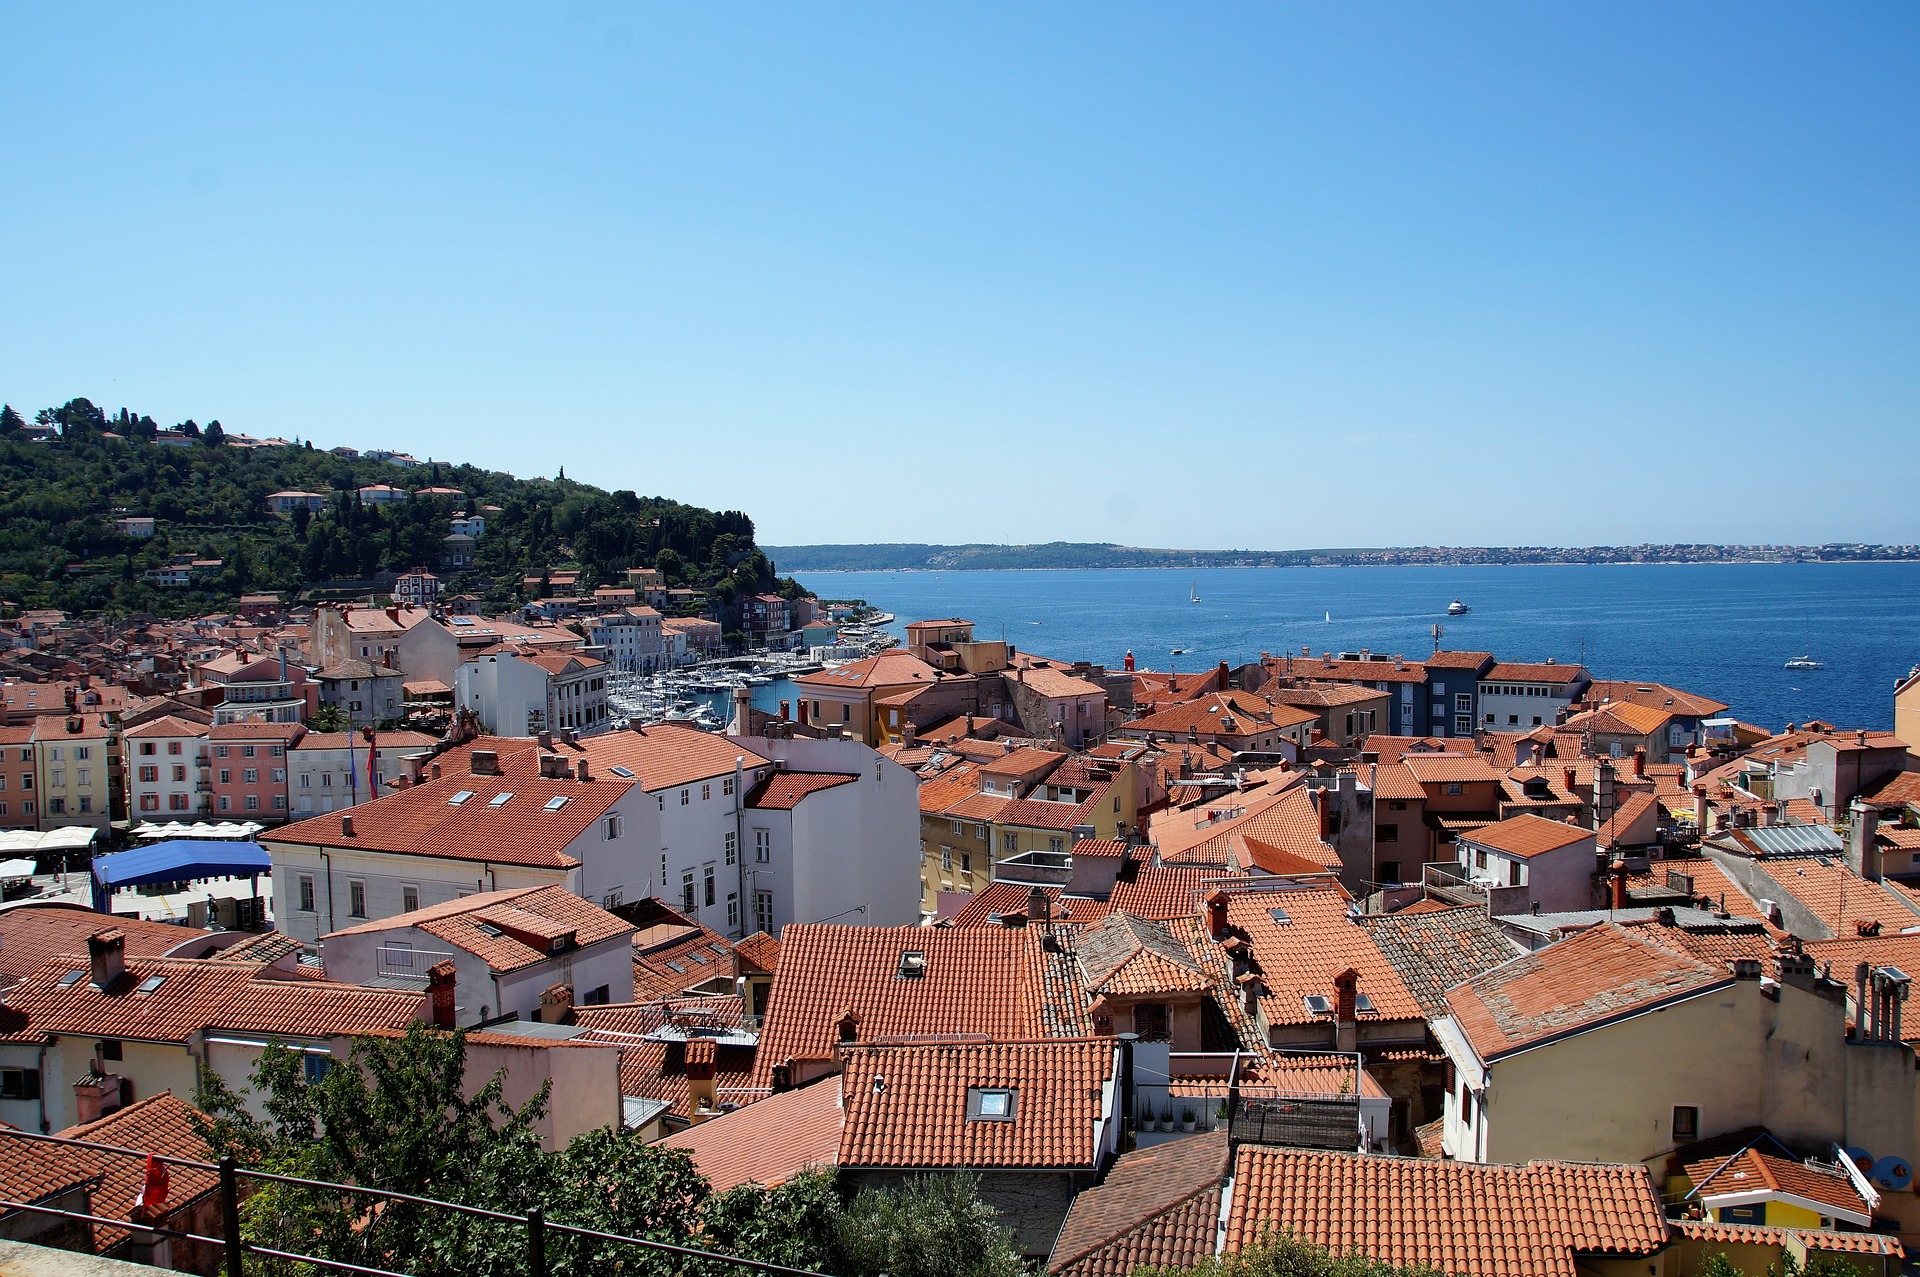 The Red Rooftops of Piran